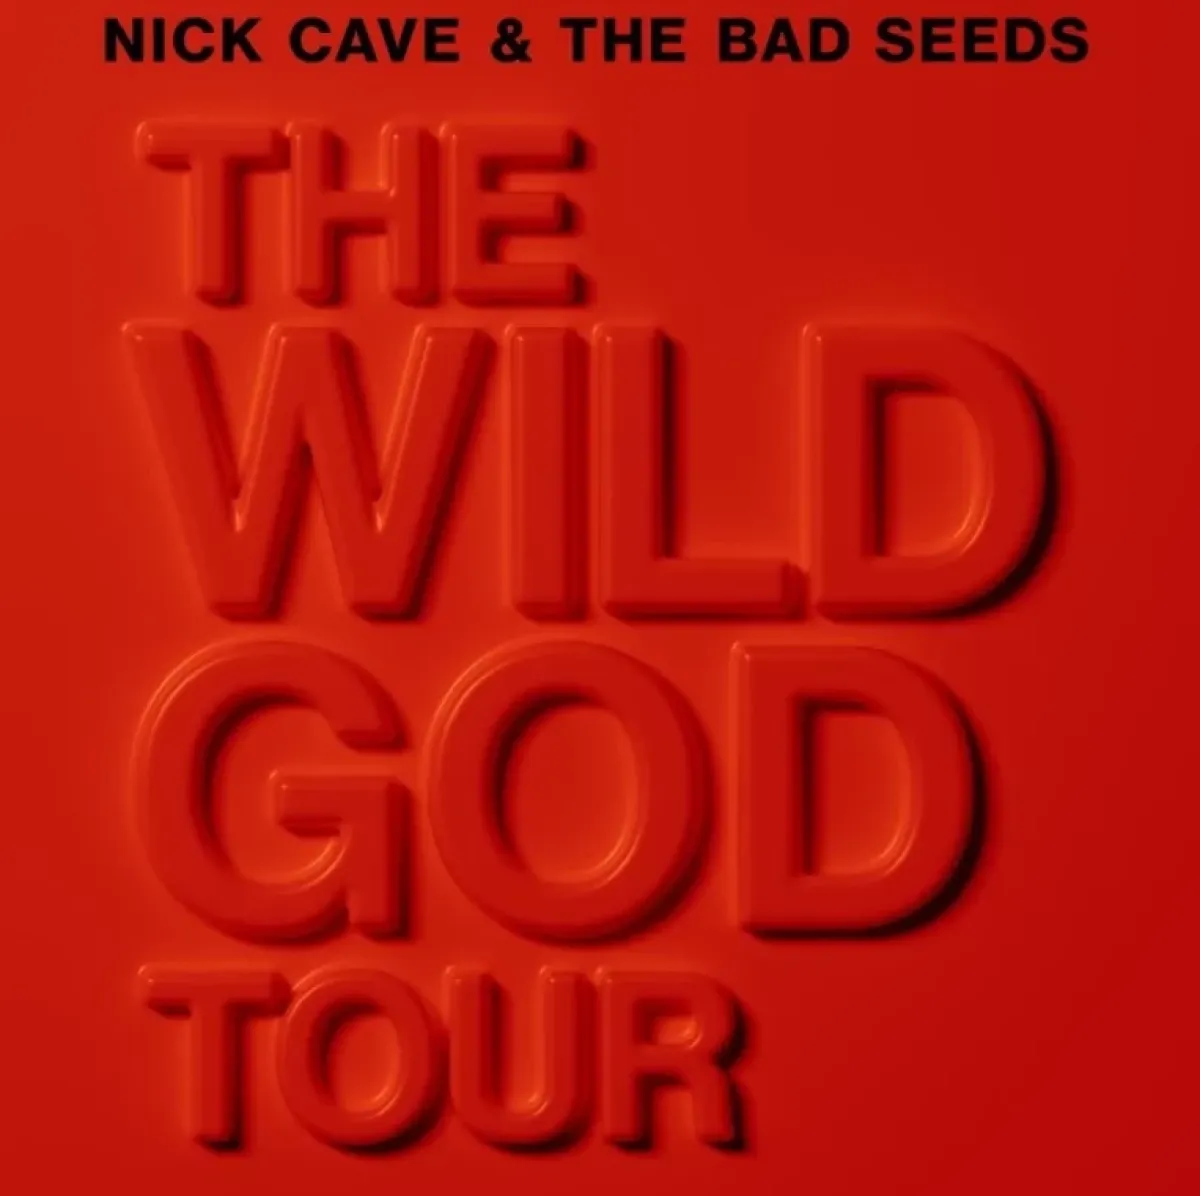 Nick Cave And The Bad Seeds at The O2 Arena Tickets